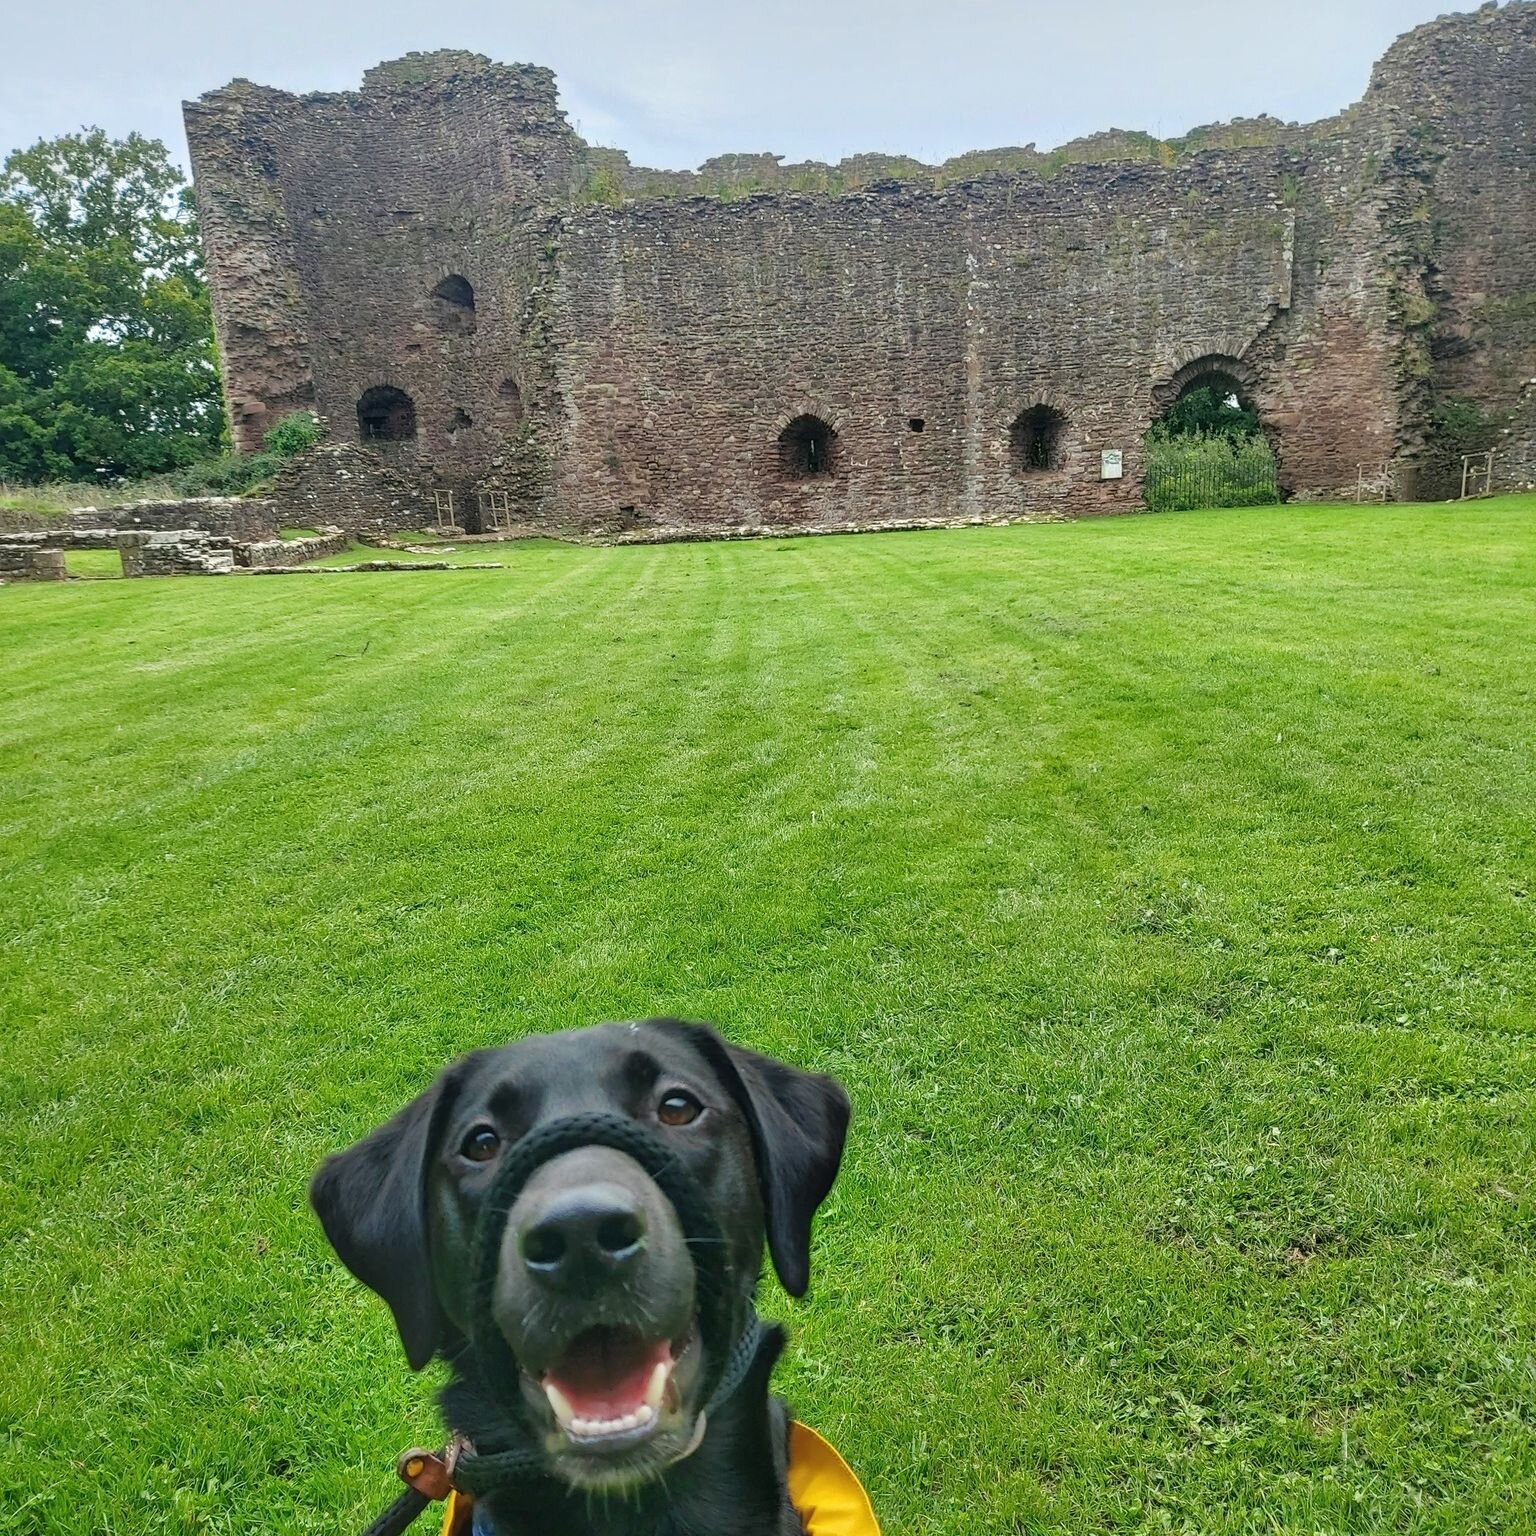 Professor Herman has been out surveying a new castle this weekend! White Castle, near Abergavenny is the largest of The Three Castles (Including Skenfrith, Grosmont &amp; White Castle).
If you're around Abergavenny he recommends a stop. It can be acc